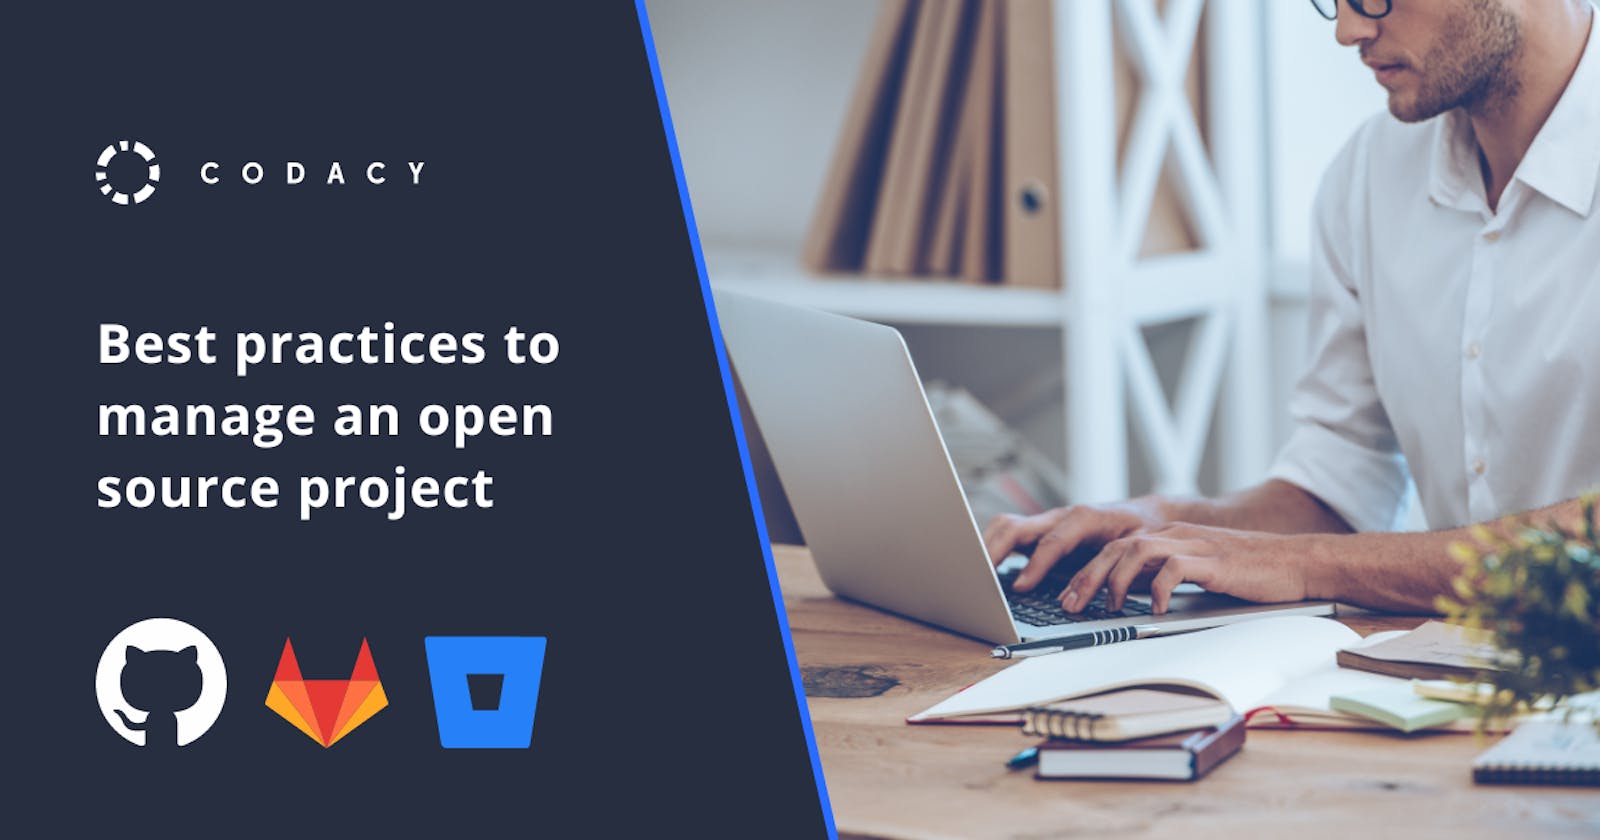 Best practices to manage an open source project